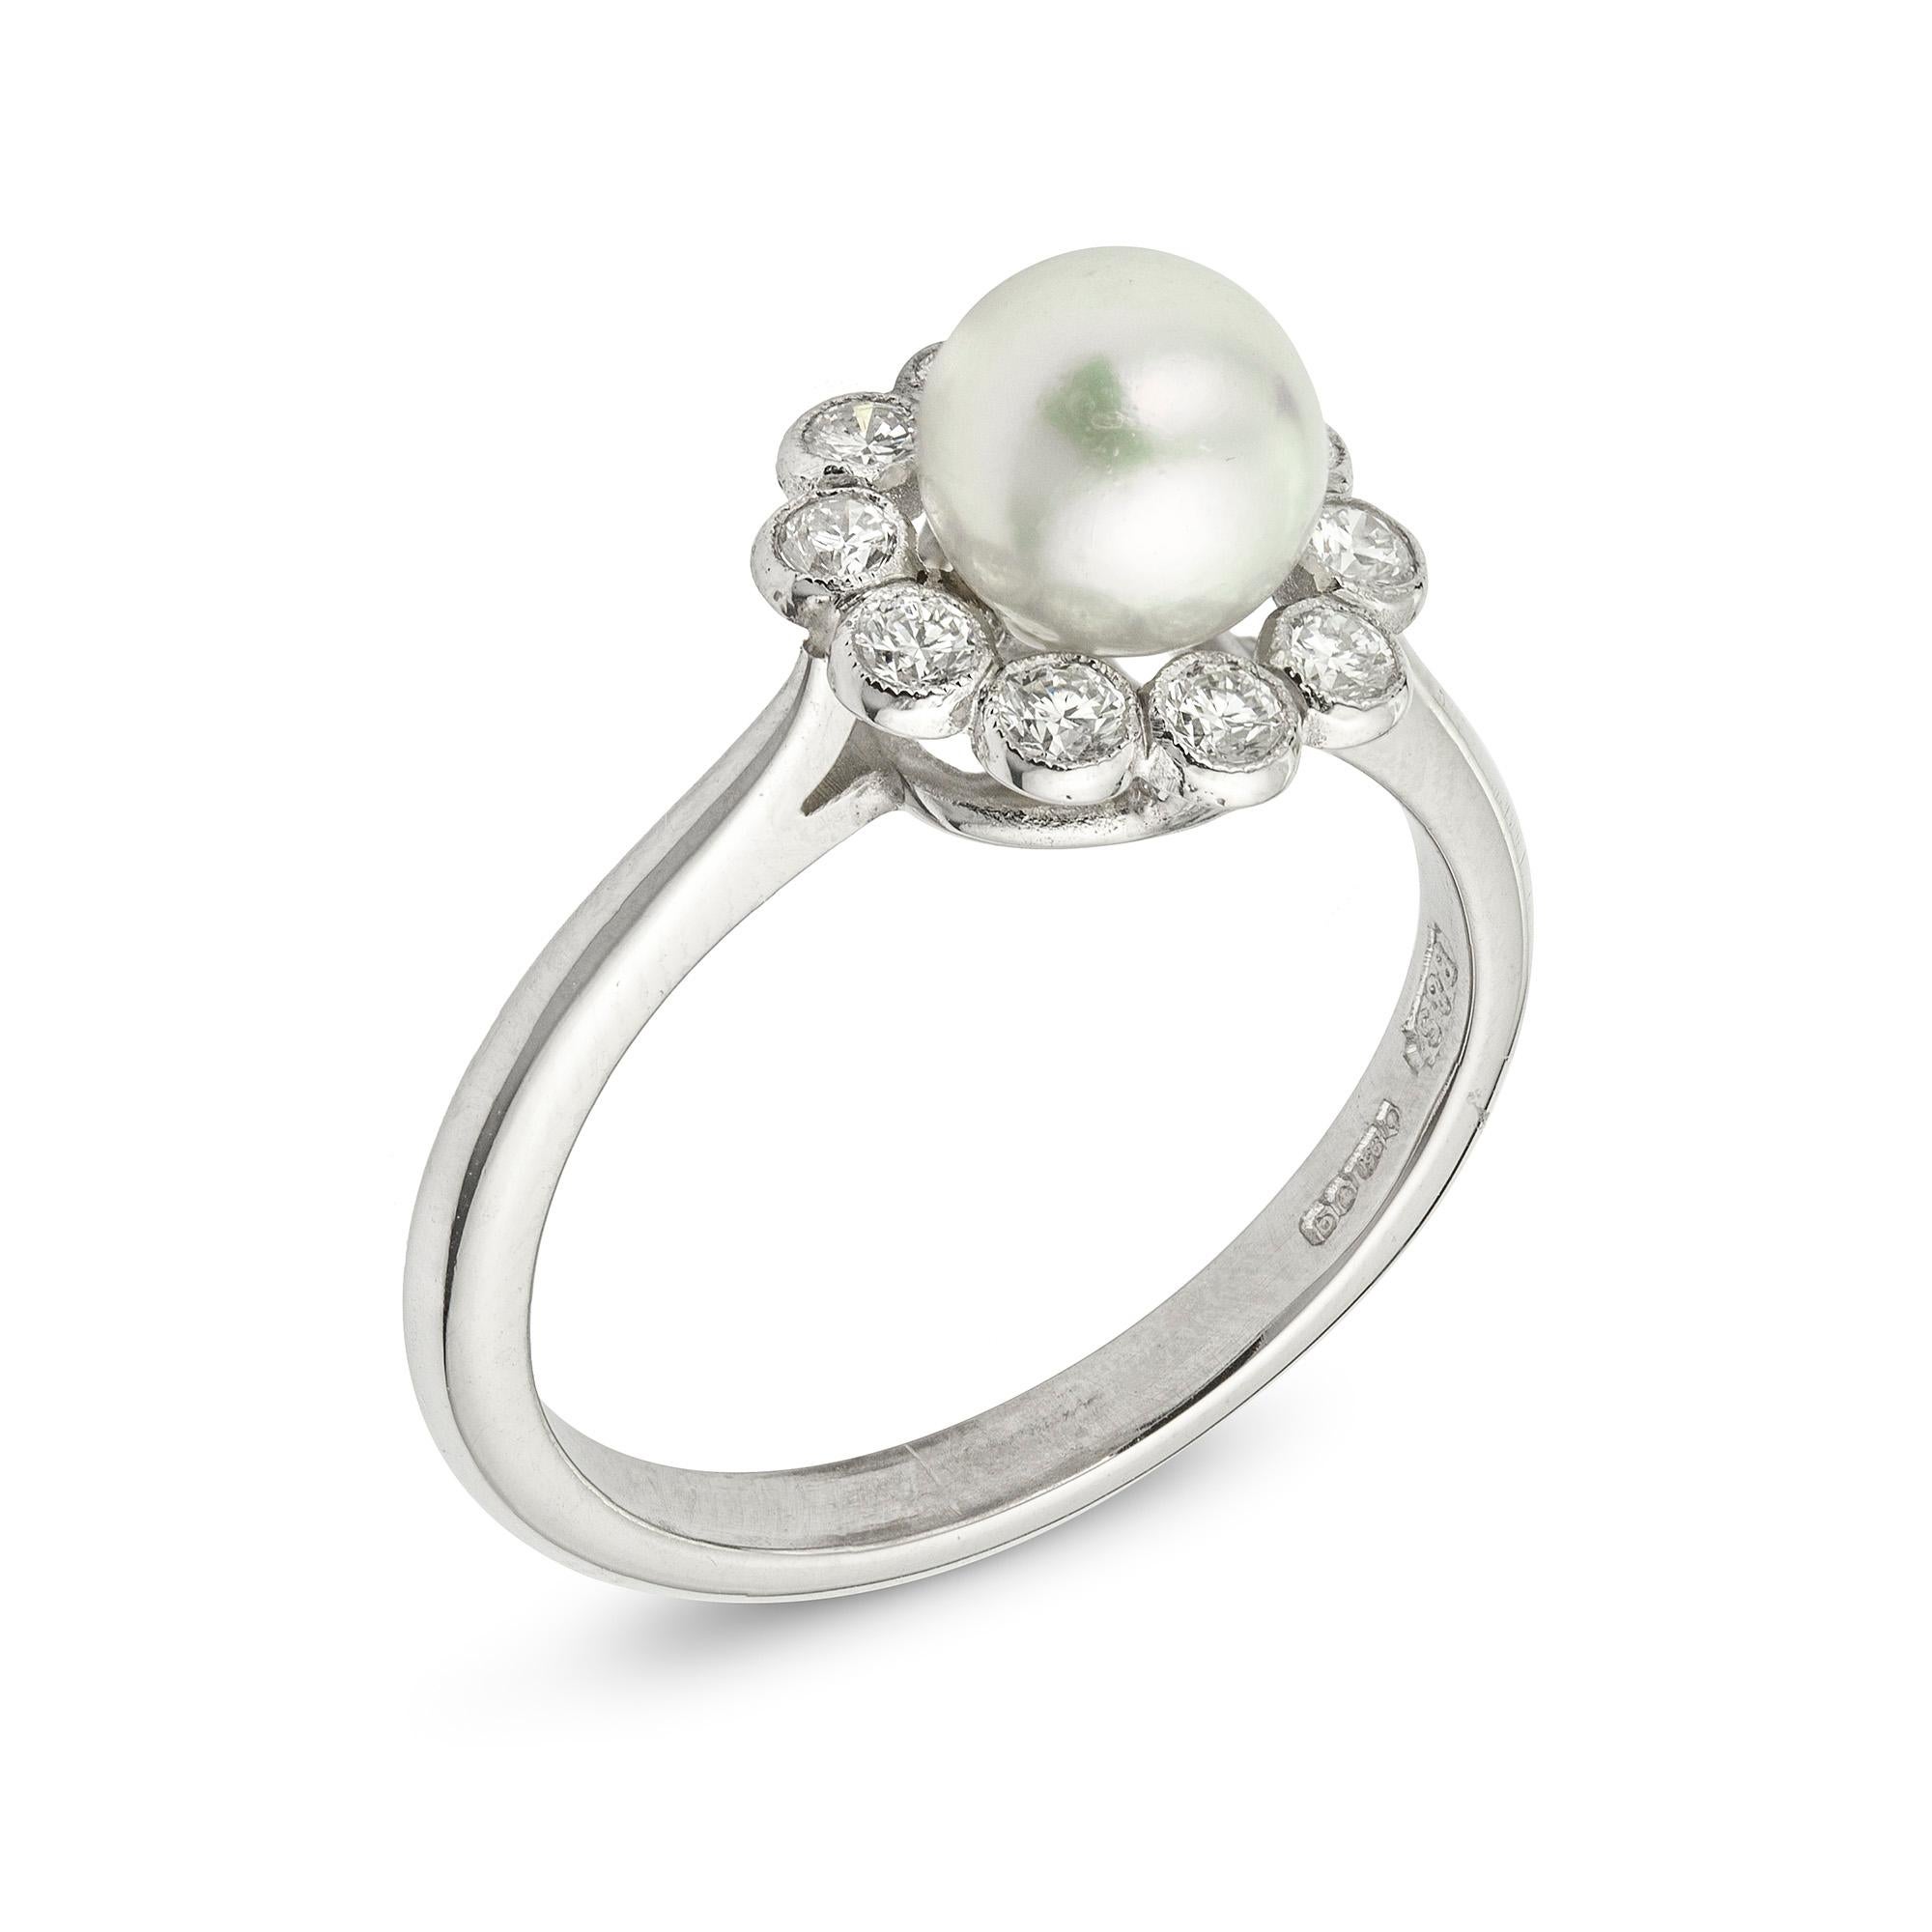 A natural pearl and diamond cluster ring, the centre set with a natural pearl surrounded by a cluster of round brilliant-cut diamonds, estimated total diamond weight 0.4cts, all millegrain set in platinum, bearing the Bentley and Skinner sponsor